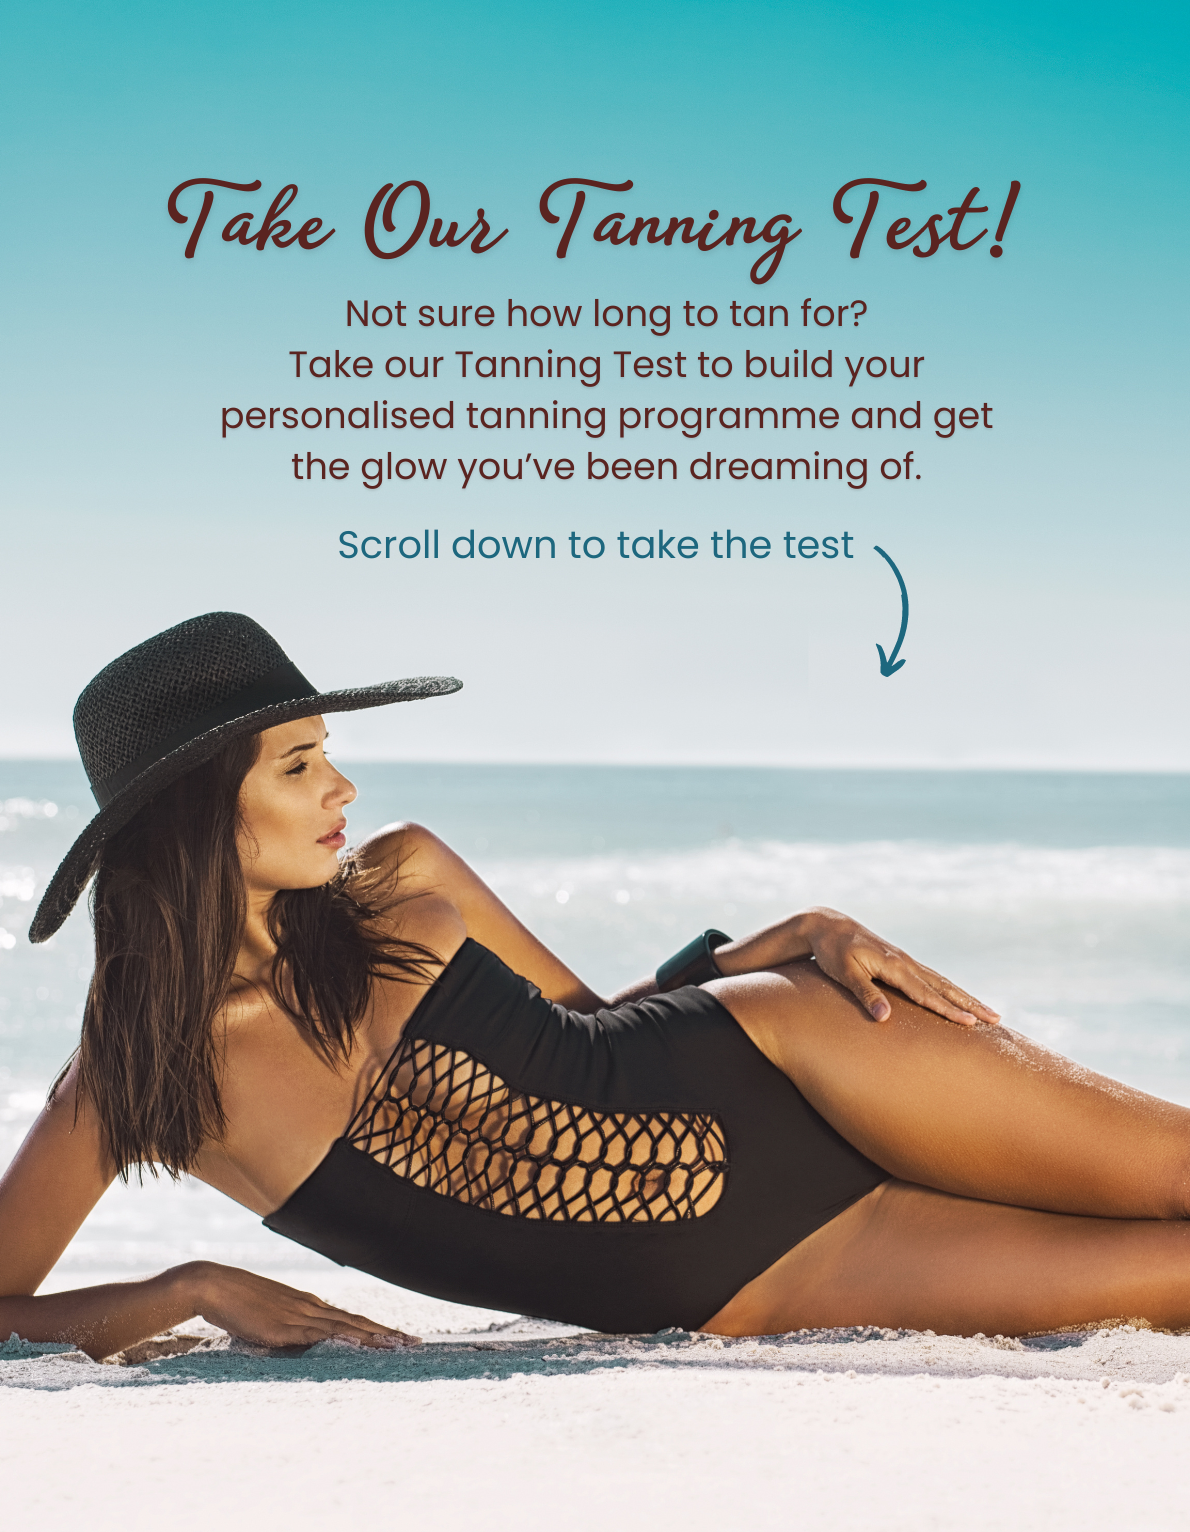 Take Our Tanning Test!